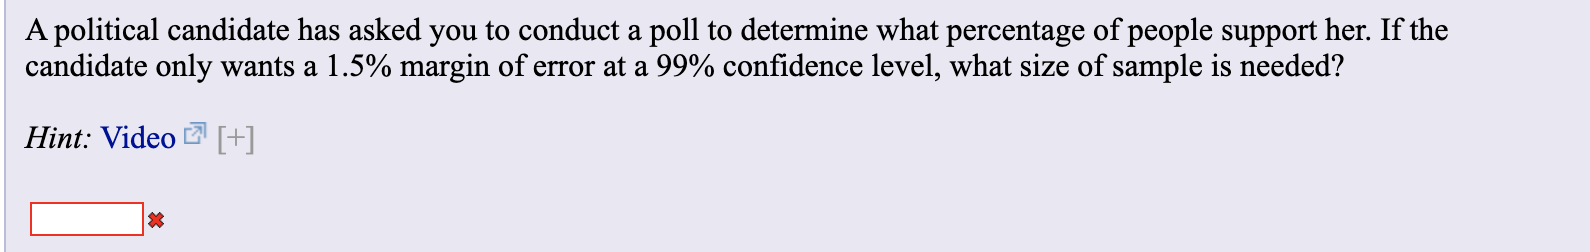 A political candidate has asked you to conduct a poll to determine what percentage of people support her. If the
candidate only wants a 1.5% margin of error at a 99% confidence level, what size of sample is needed?
Hint: Video +
